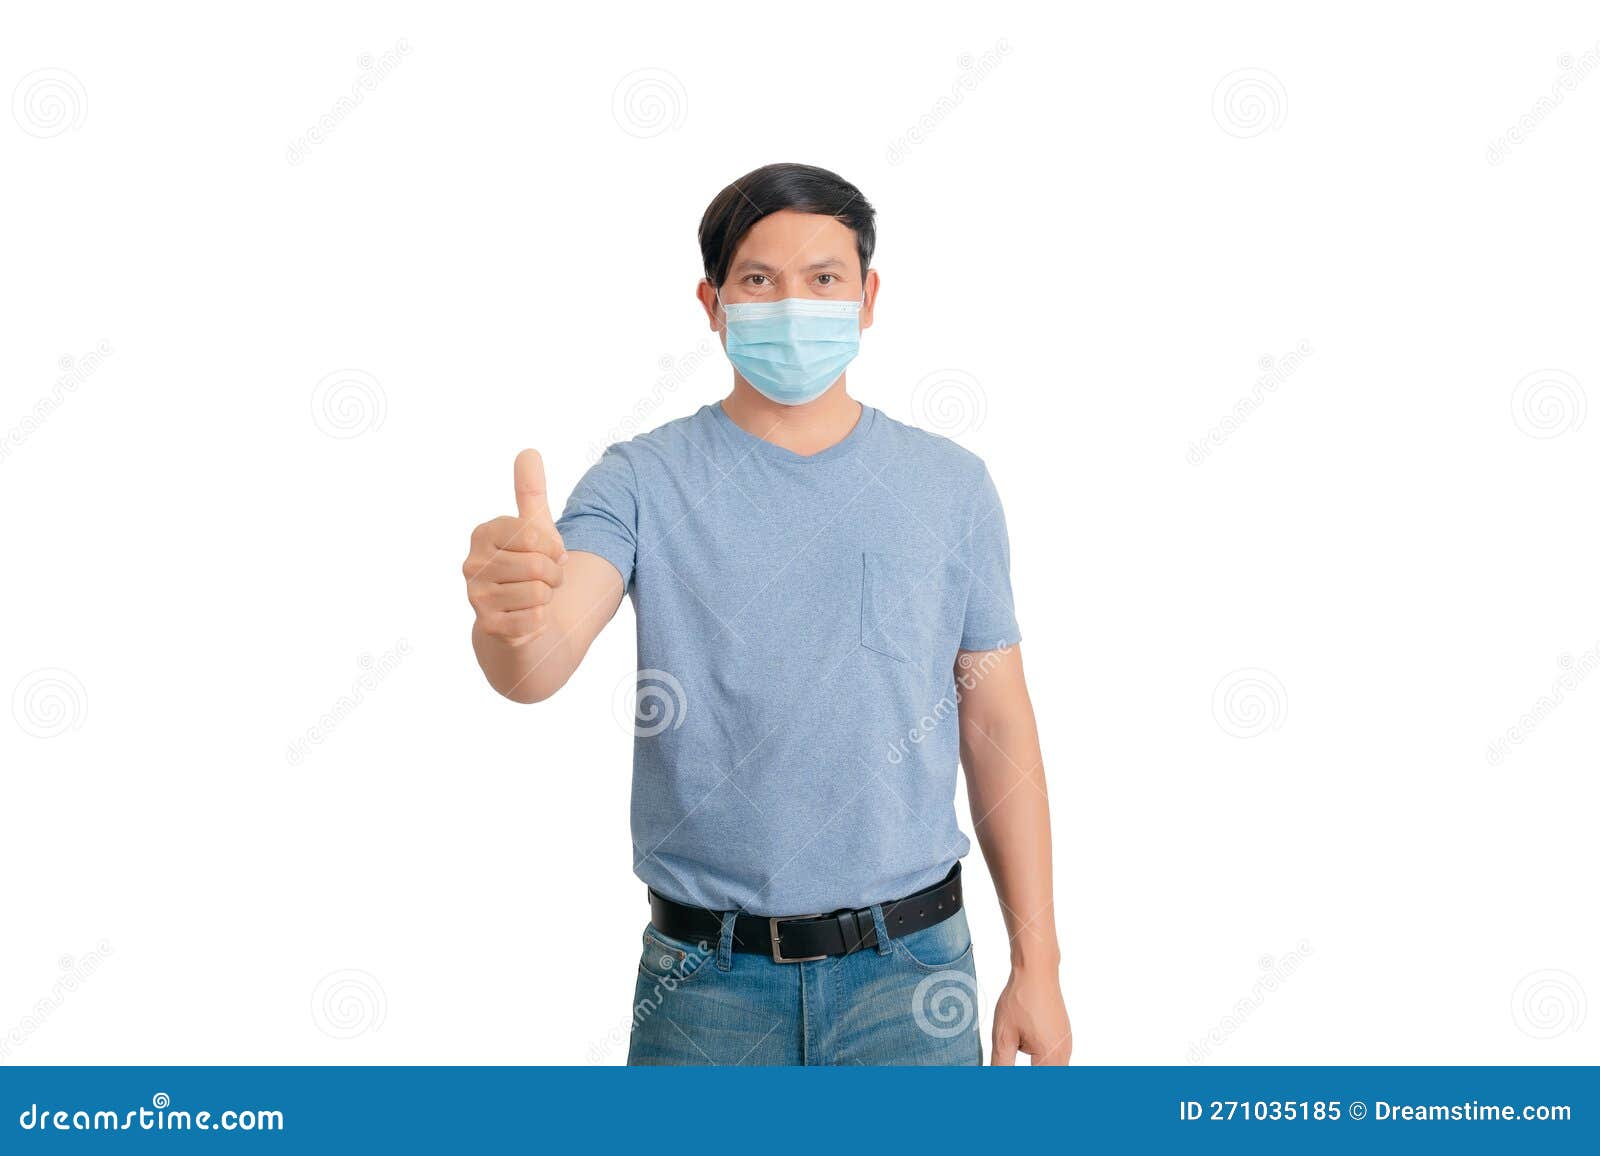 Asian Man Wearing a Mass Gesture Stock Image - Image of prevention ...